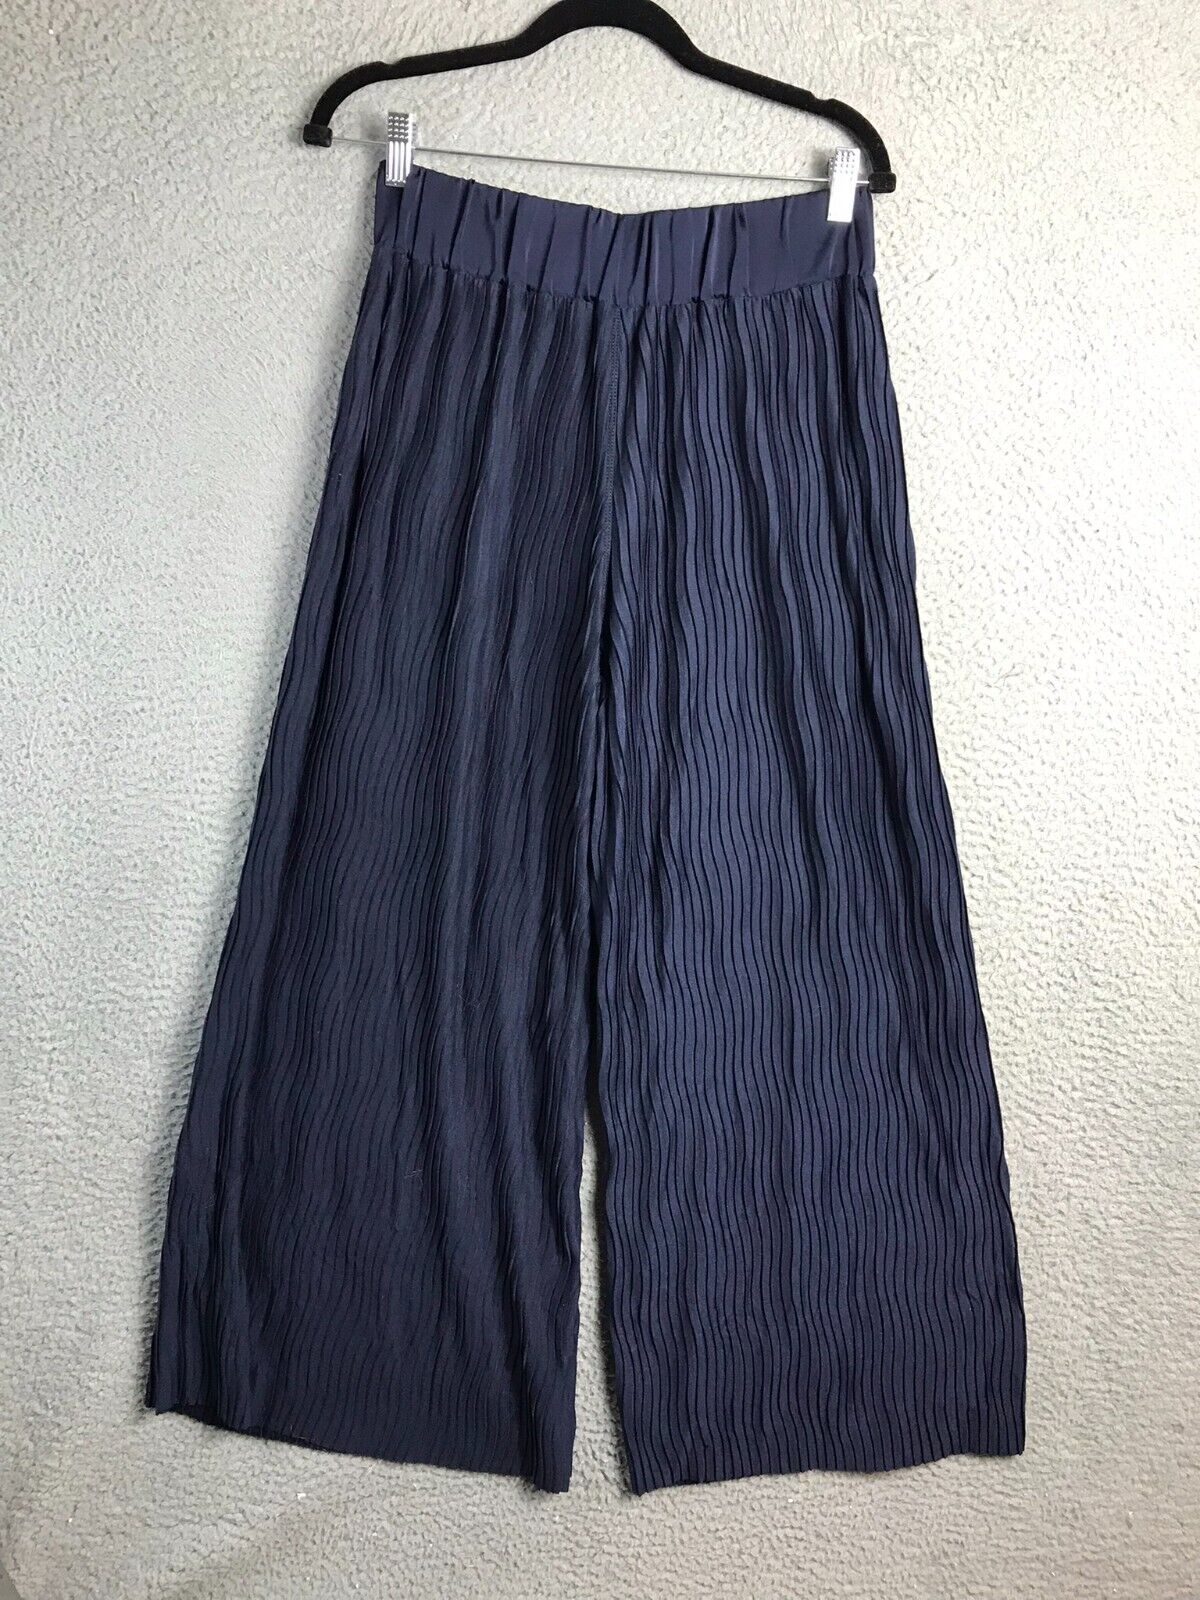 Anthropologie Palazzo Pants Womens XS Navy Blue P… - image 9